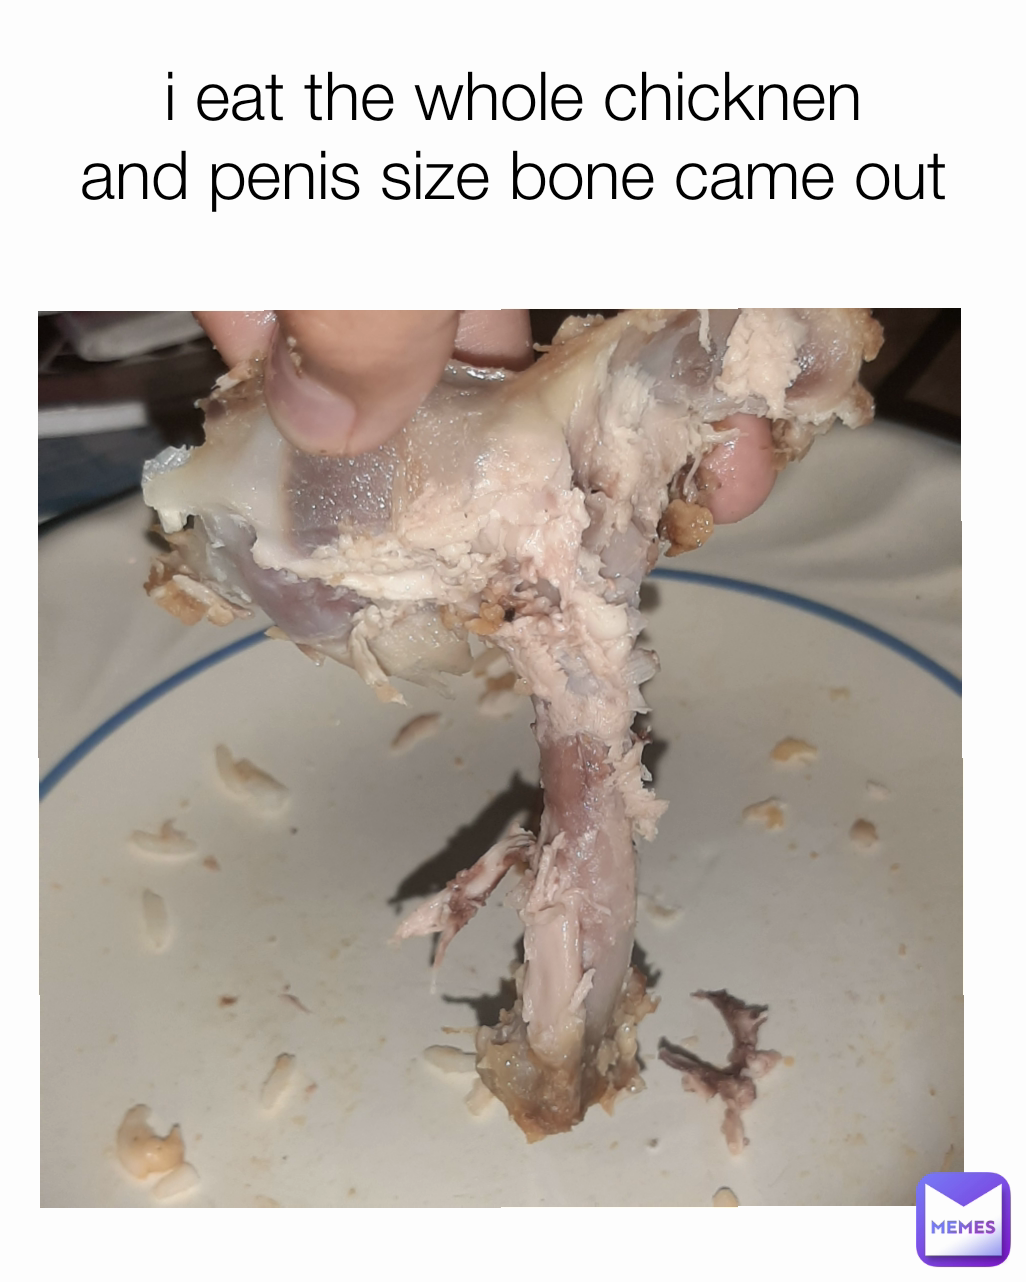 i eat the whole chicknen
and penis size bone came out